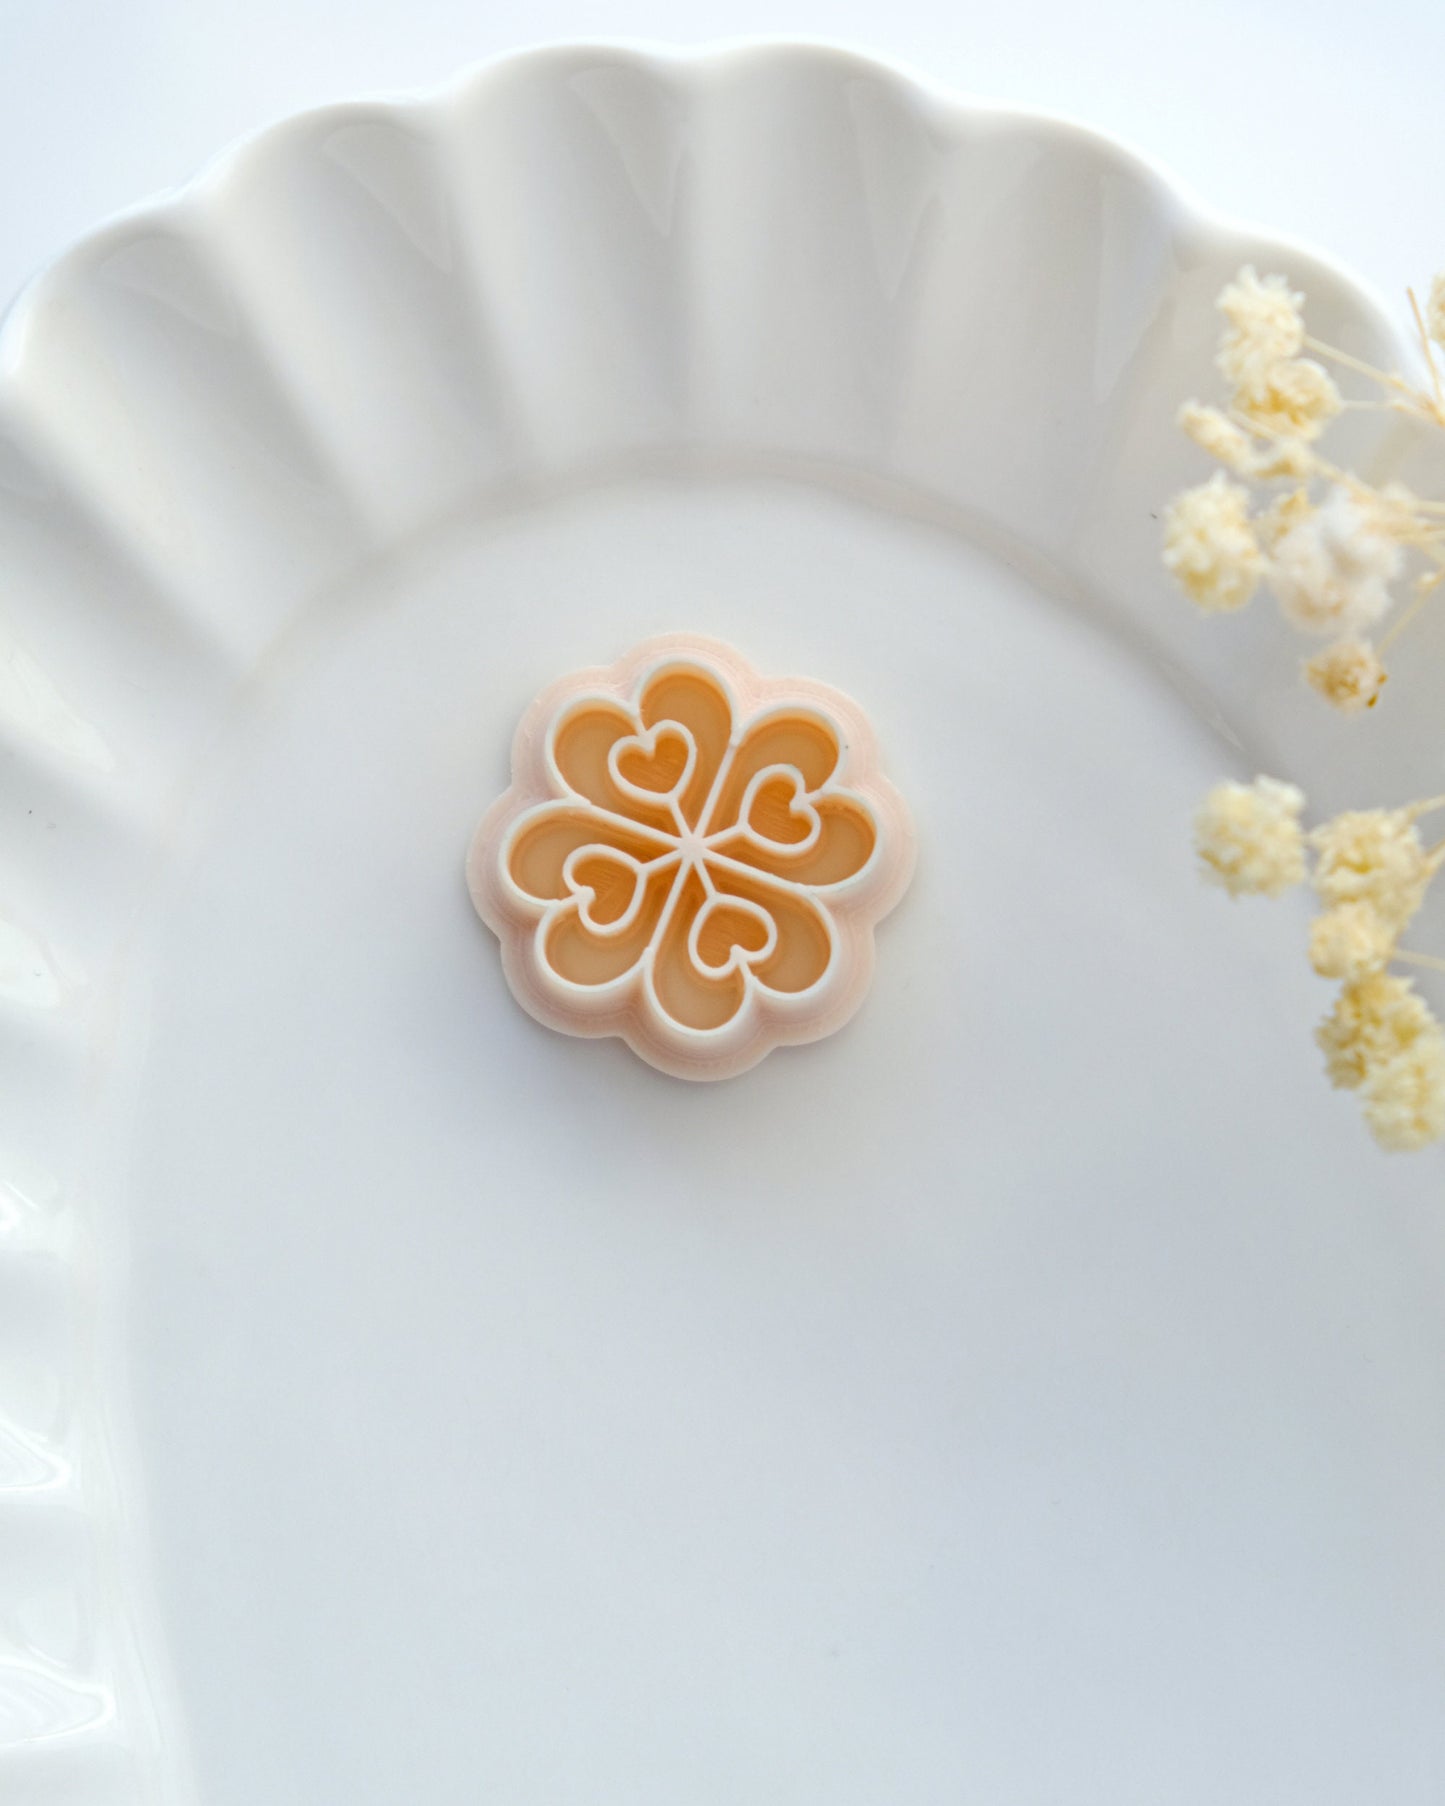 Four Leaf Clover Clay Cutters | St Patrick's Day Clover Polymer Clay Cutters | Earring Cutters | Jewelry Making